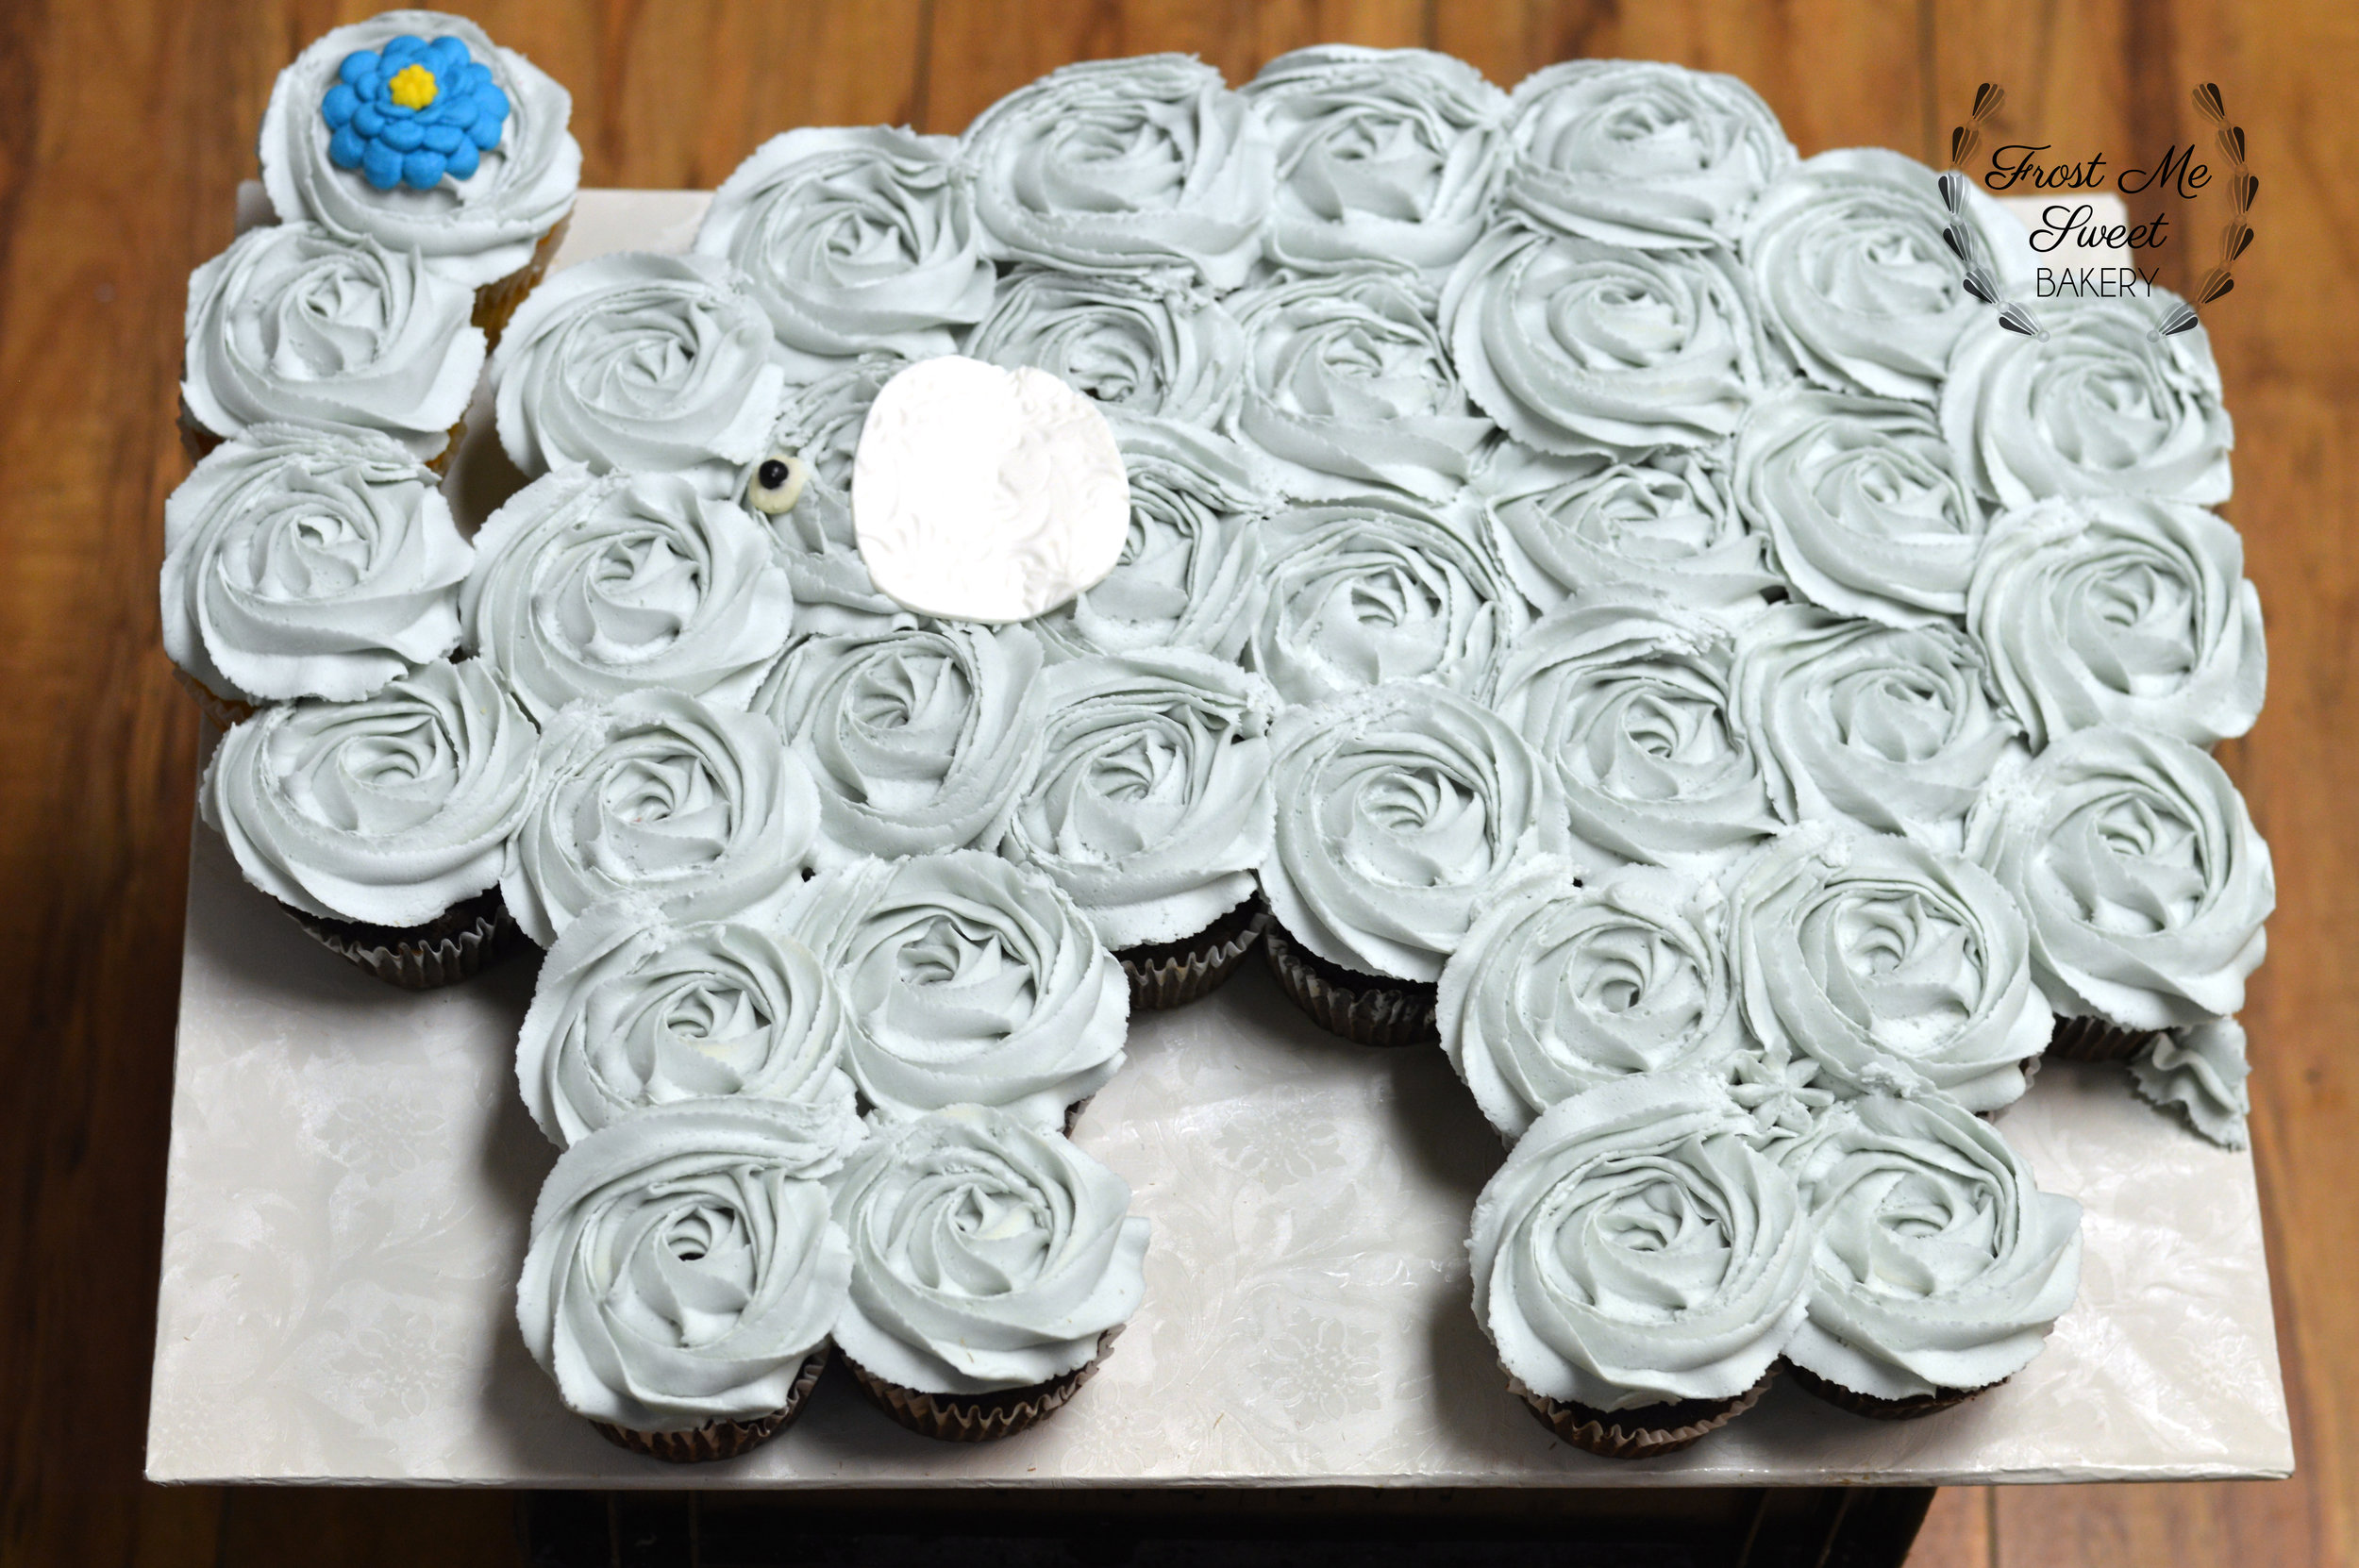 Pictures Of Baby Shower Cupcakes / Baby Shower Cupcakes Baking Mad / Pictures of baby shower cupcakes.